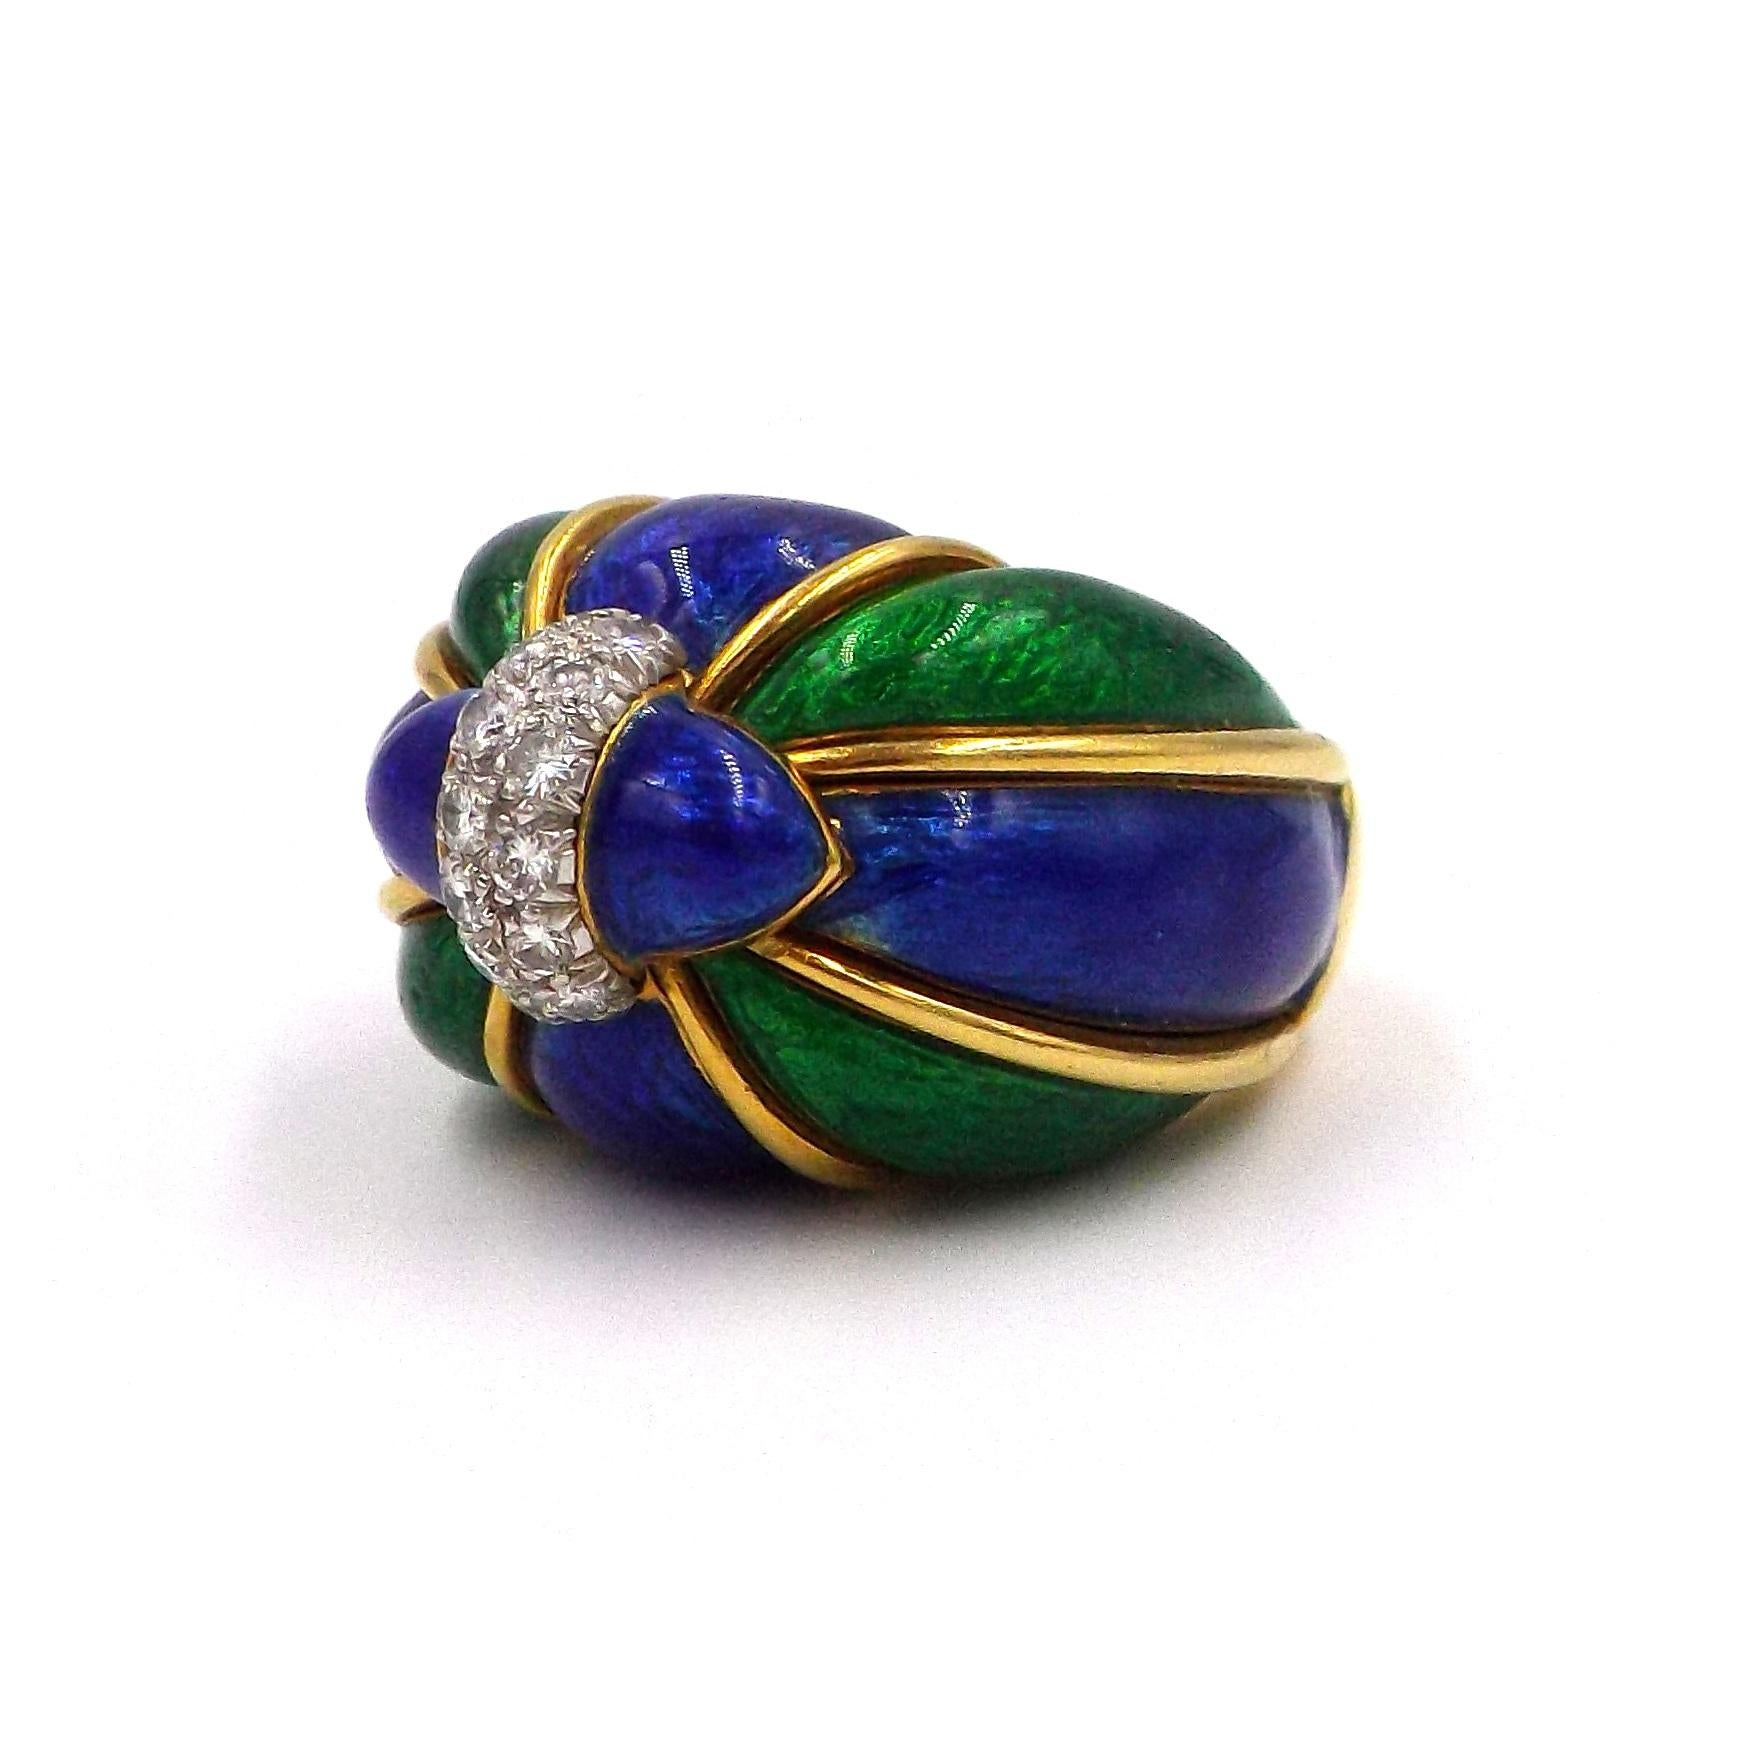 18 kt., striped with bombé panels of patterned blue and green enamel, topped by a platinum band set with 13 round diamonds approximately .40 ct., signed Webb, approximately 19.4 dwts. Size 6 1/2.
Diamonds: G-H-VS.
Width 11/16 inch. Height ap. 3/4